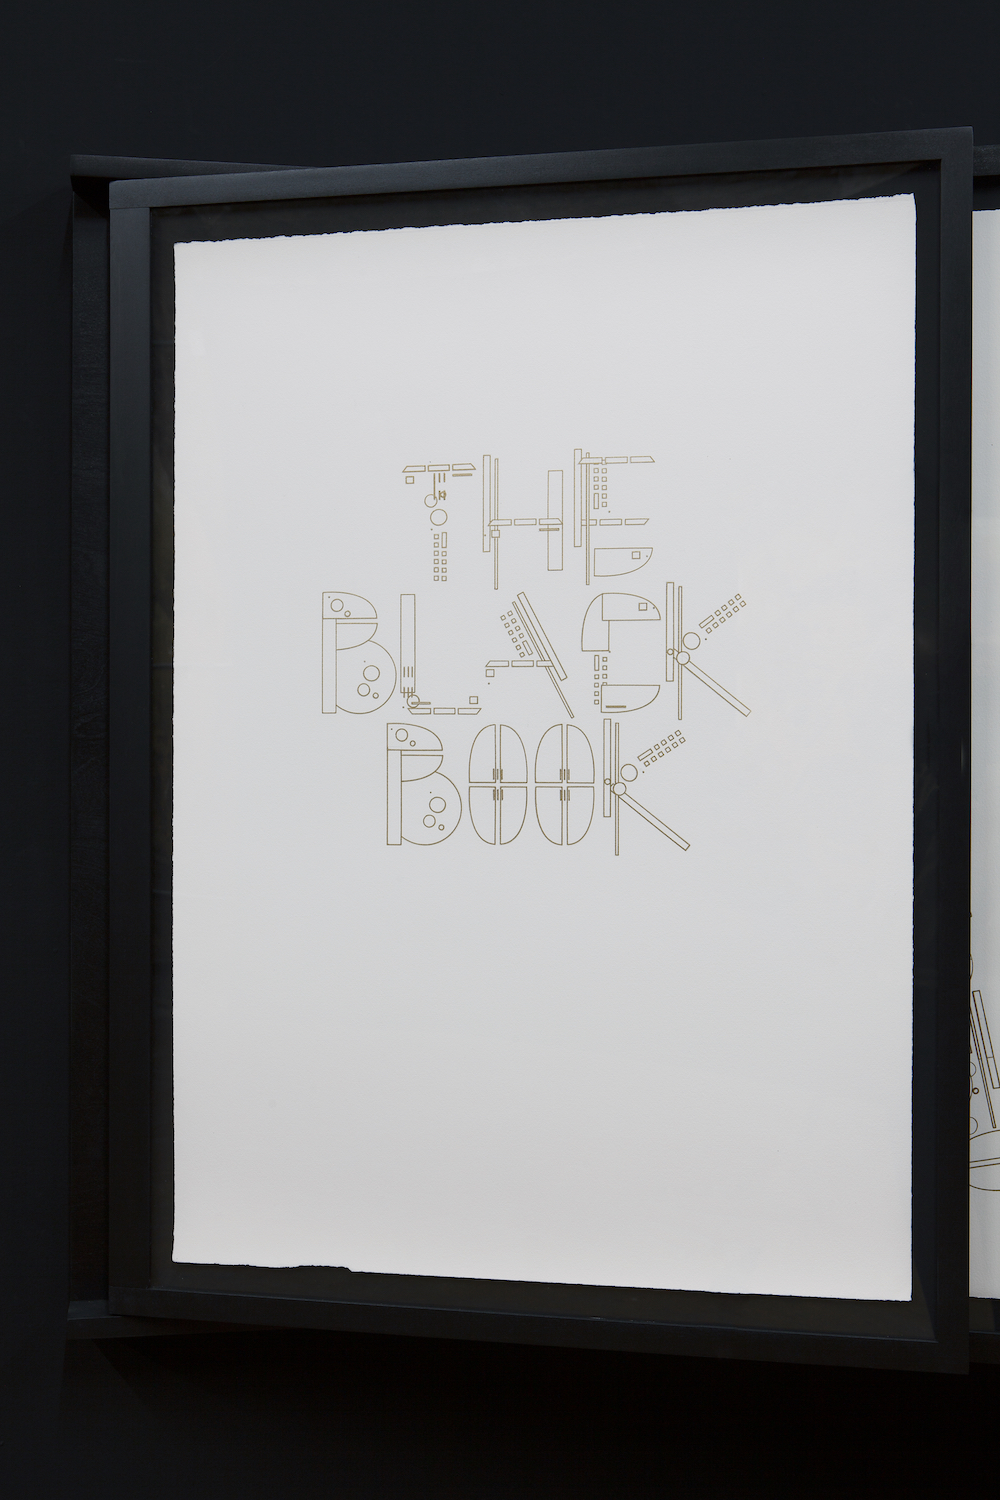 Glendalys Medina, *The Black Book*, 2019, detail. Marker on 27 sheets of paper. 24 x 36 inches each